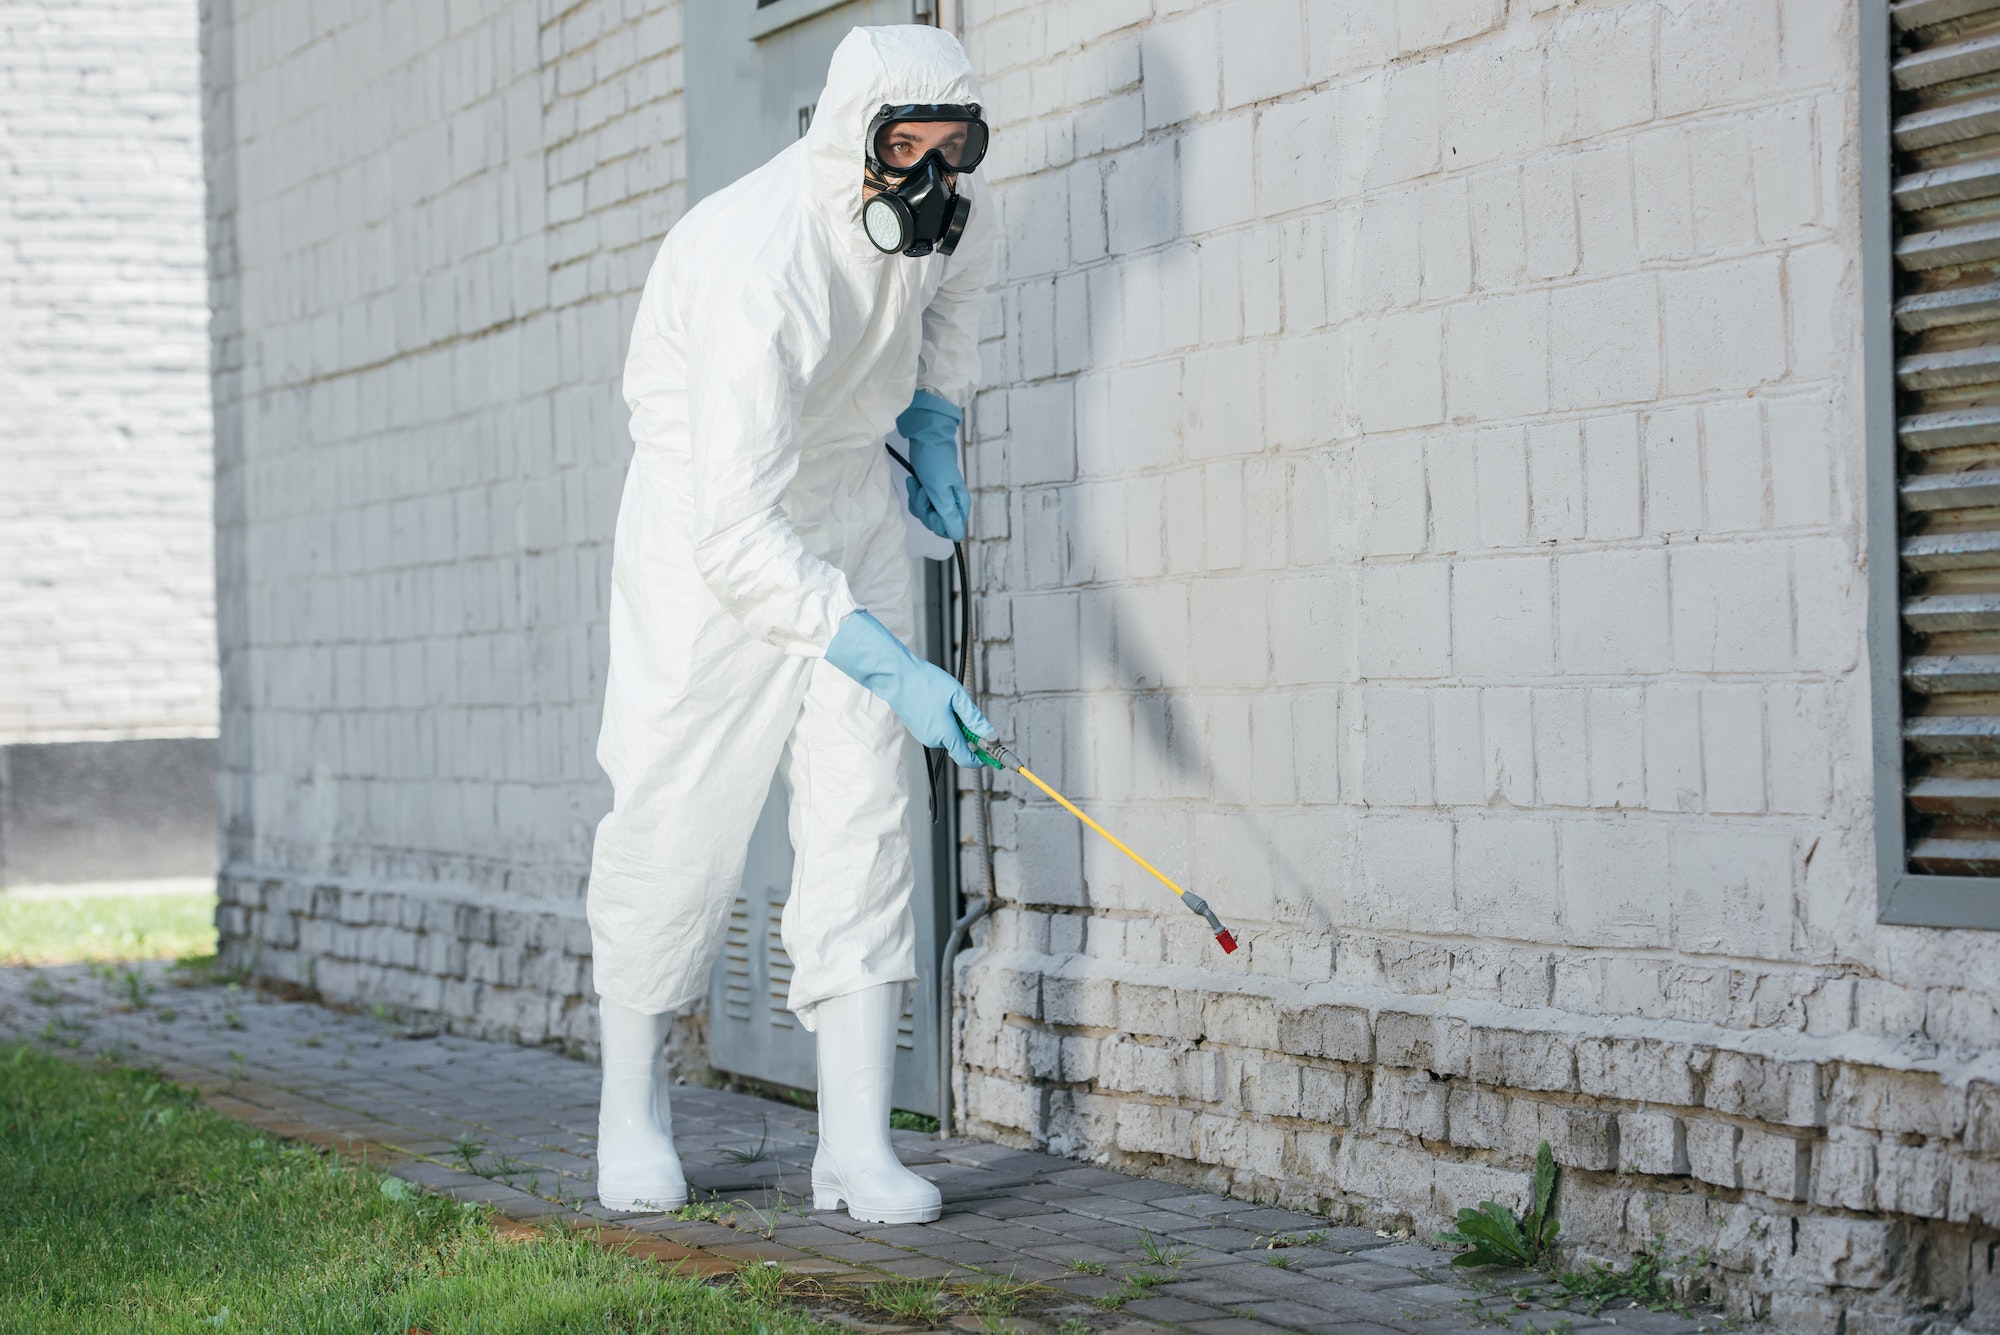 pest control worker spraying chemicals with sprayer on building wall